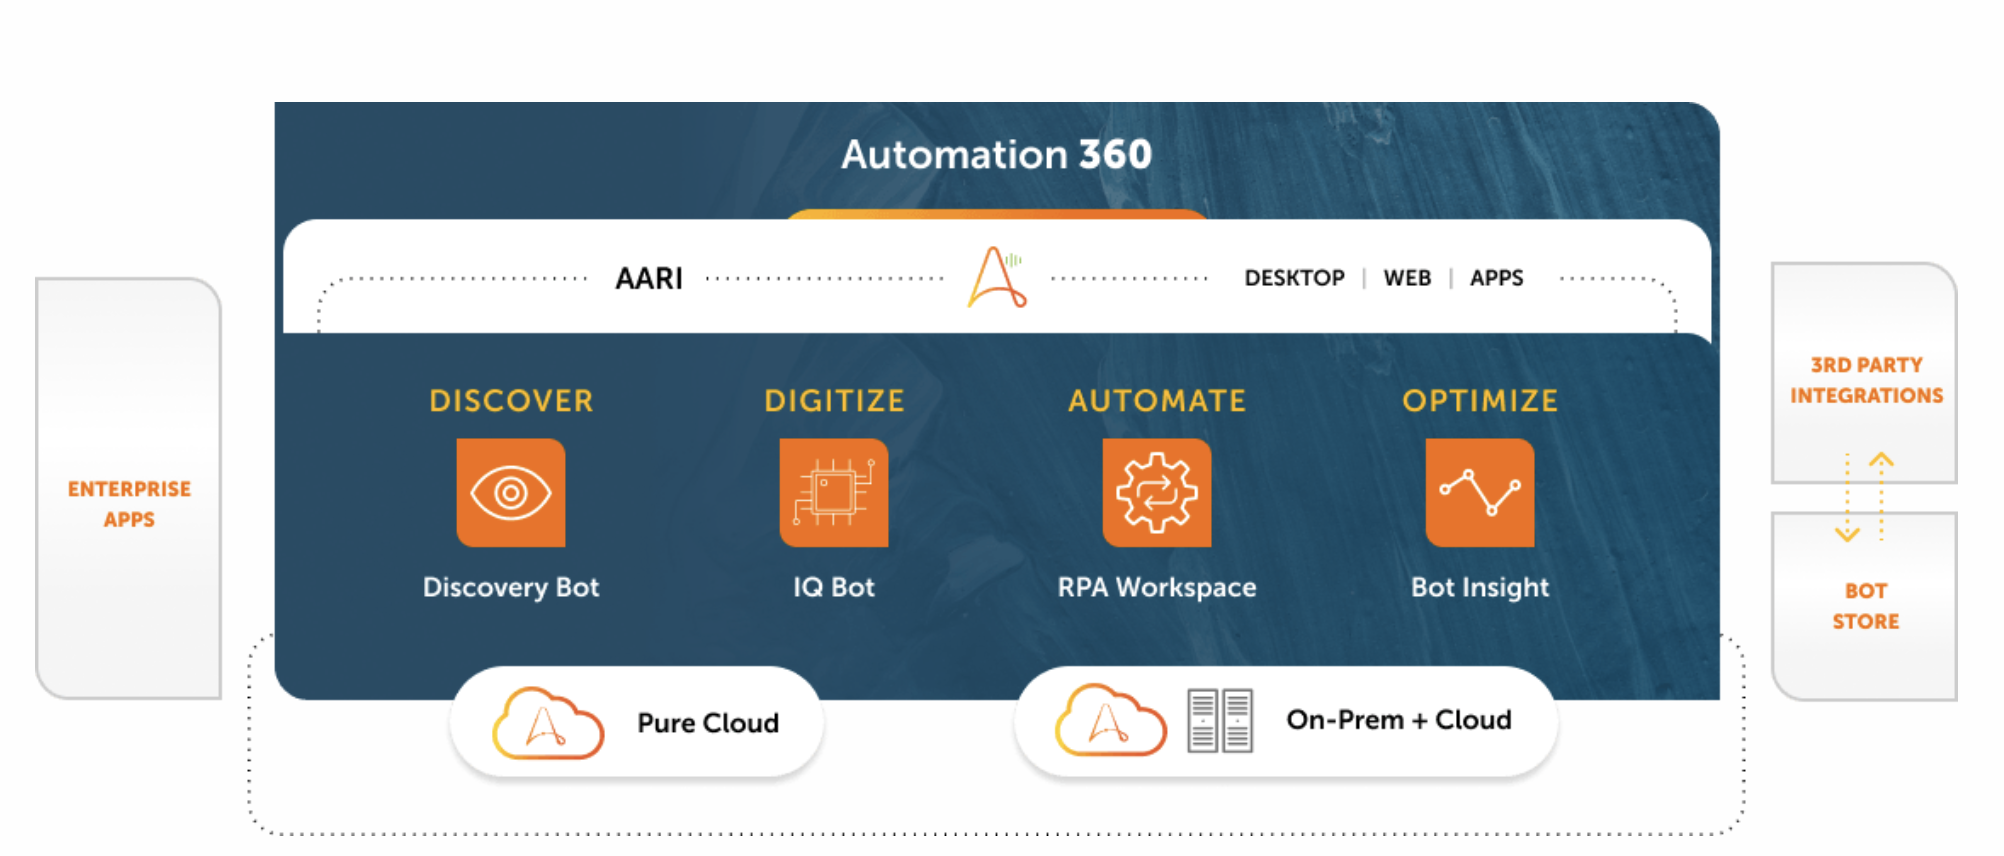 Automation Anywhere e85568a3-e997-4f23-9d55-91d25f093821.png